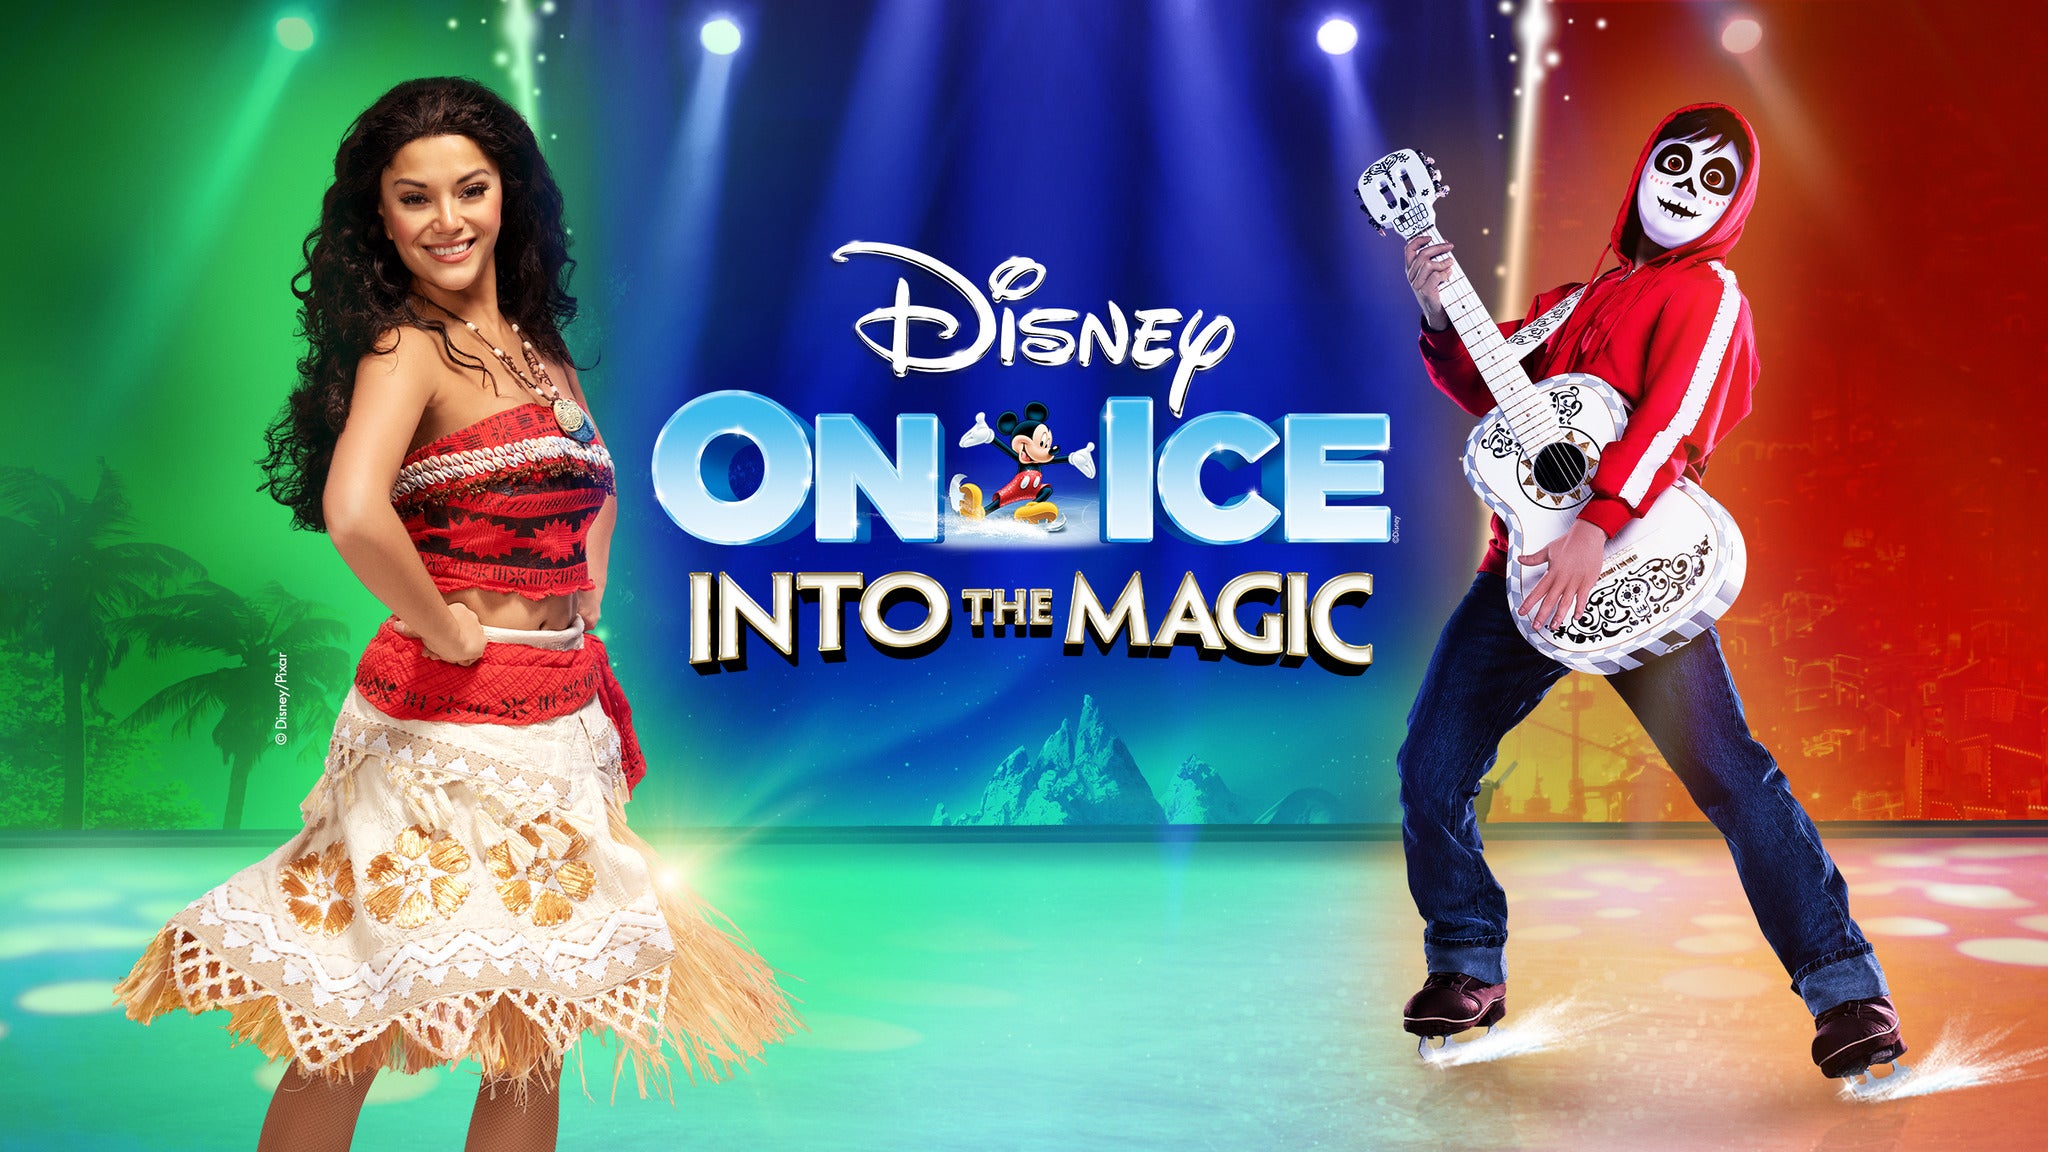 Disney On Ice Presents Into The Magic in der Oakland Arena Tickets